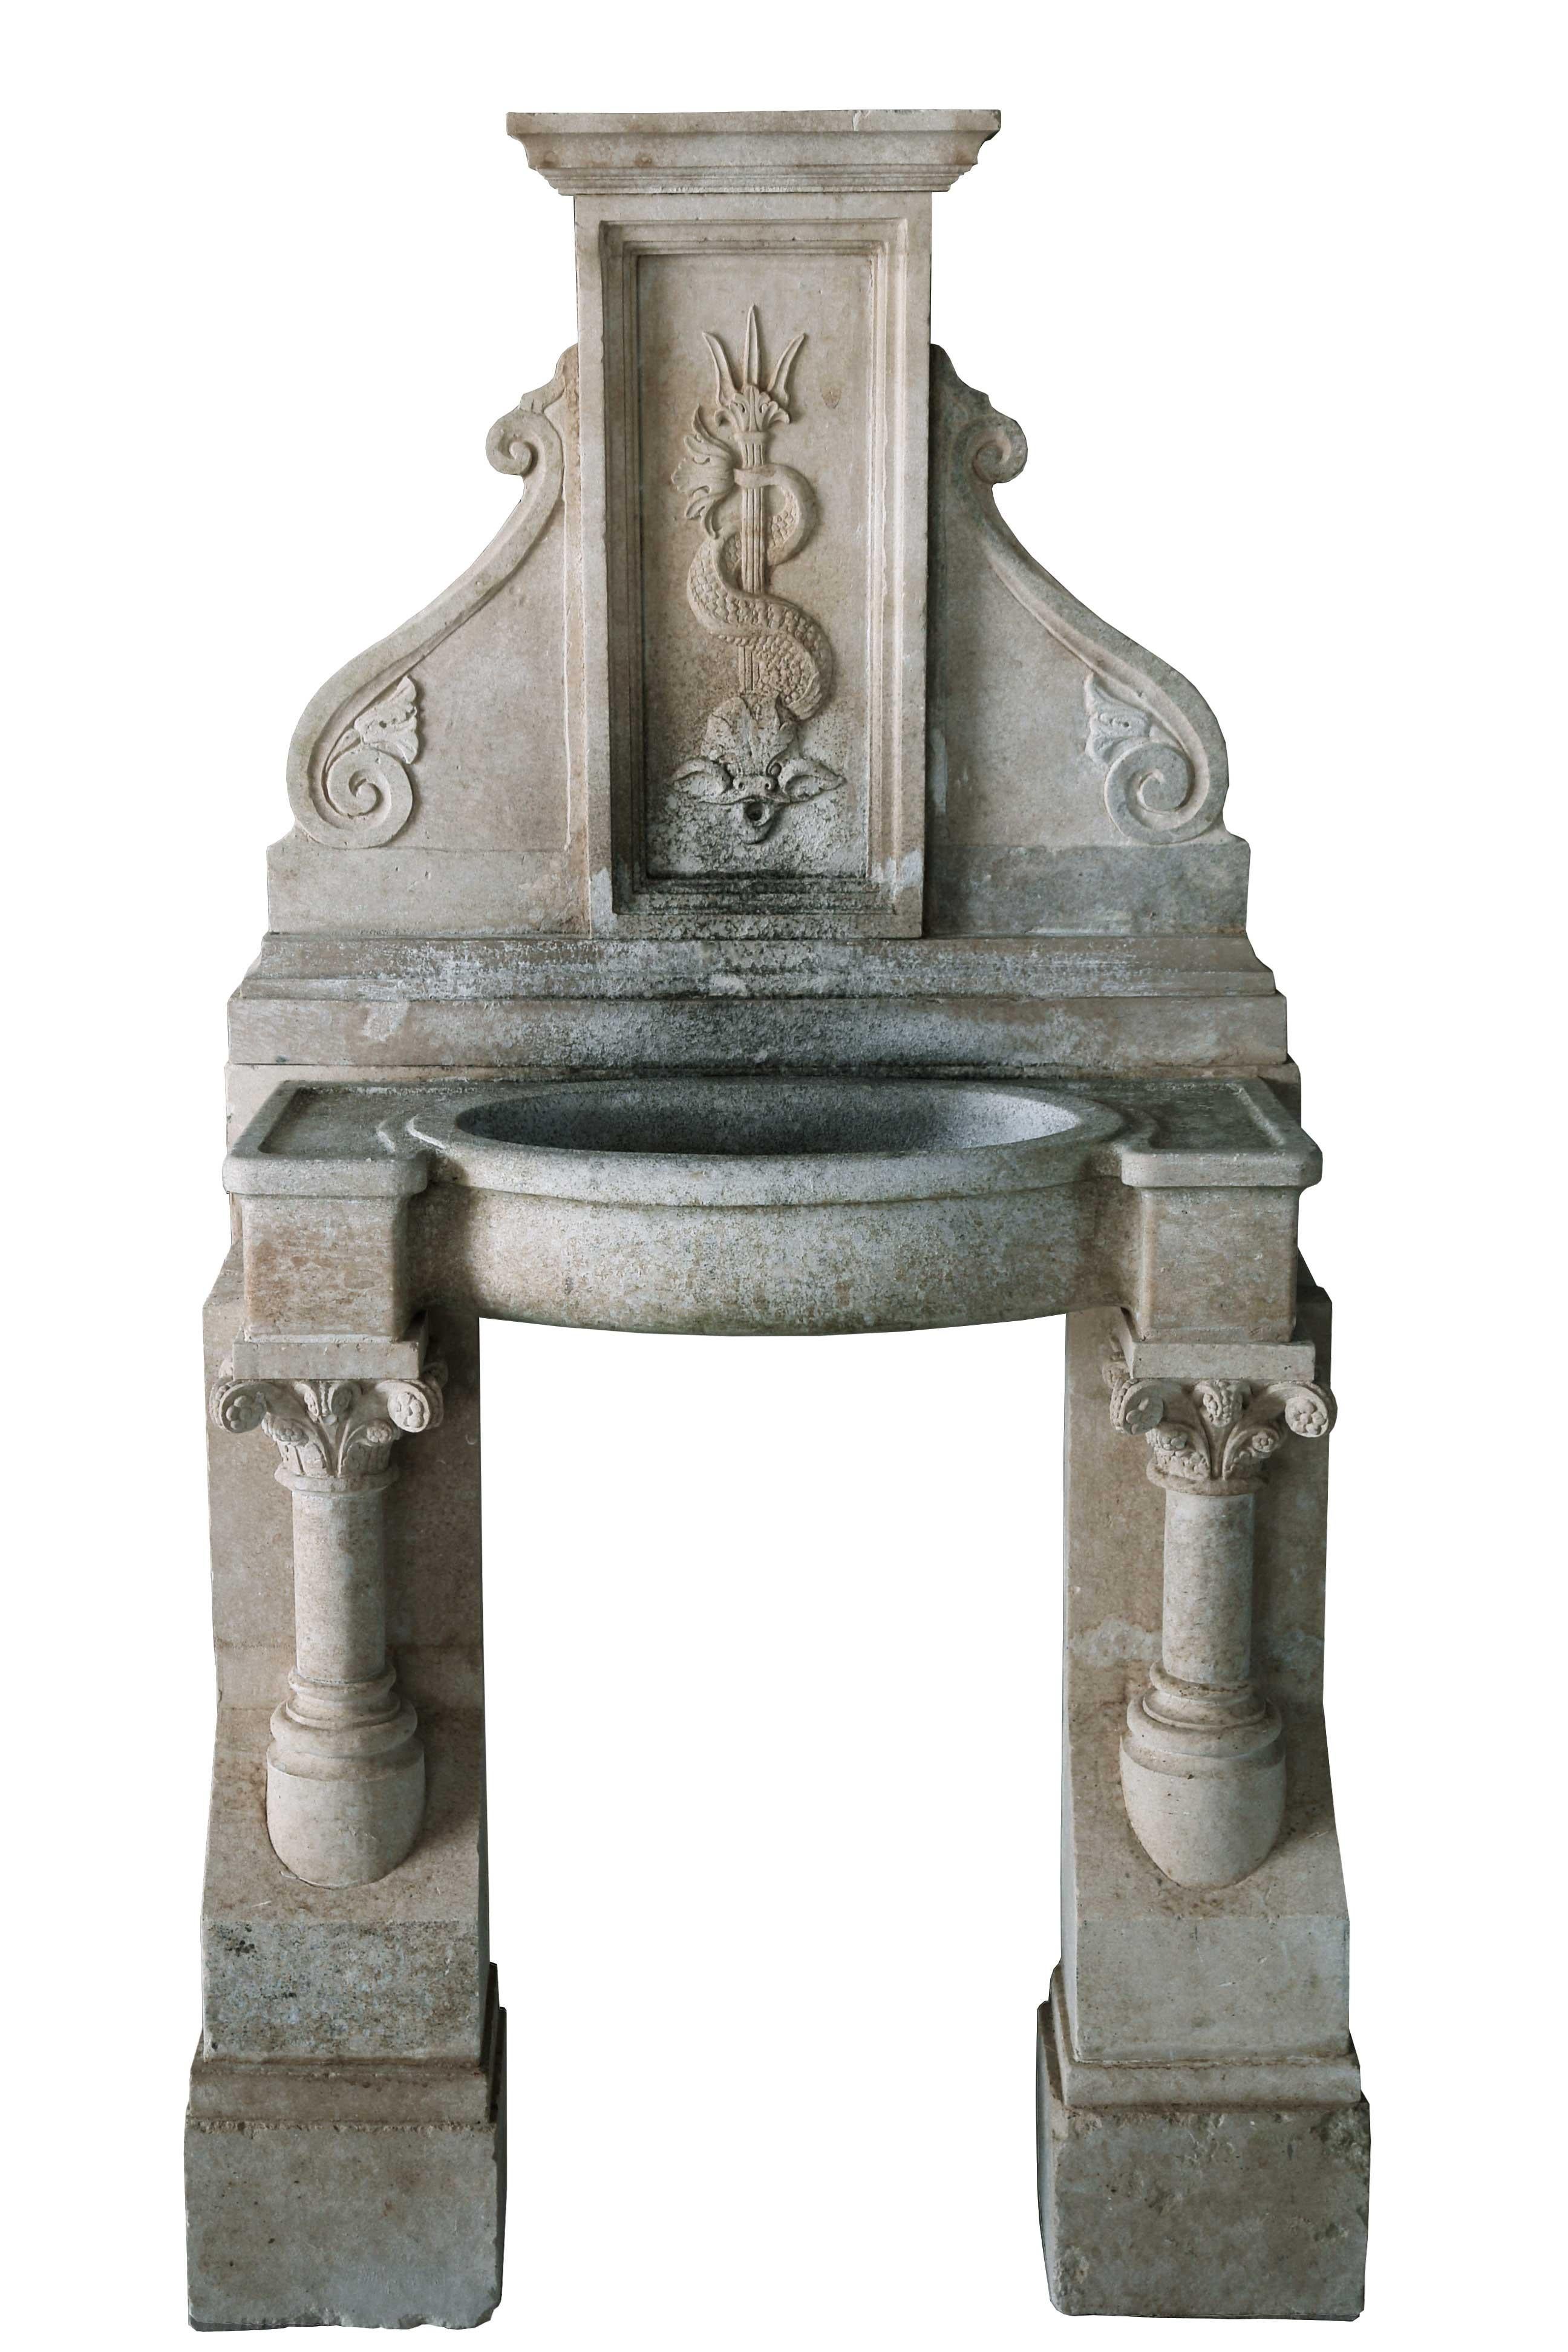 Italian Renaissance Style Fountain Hand-Carved in Pure Limestone Antique Patina For Sale 9